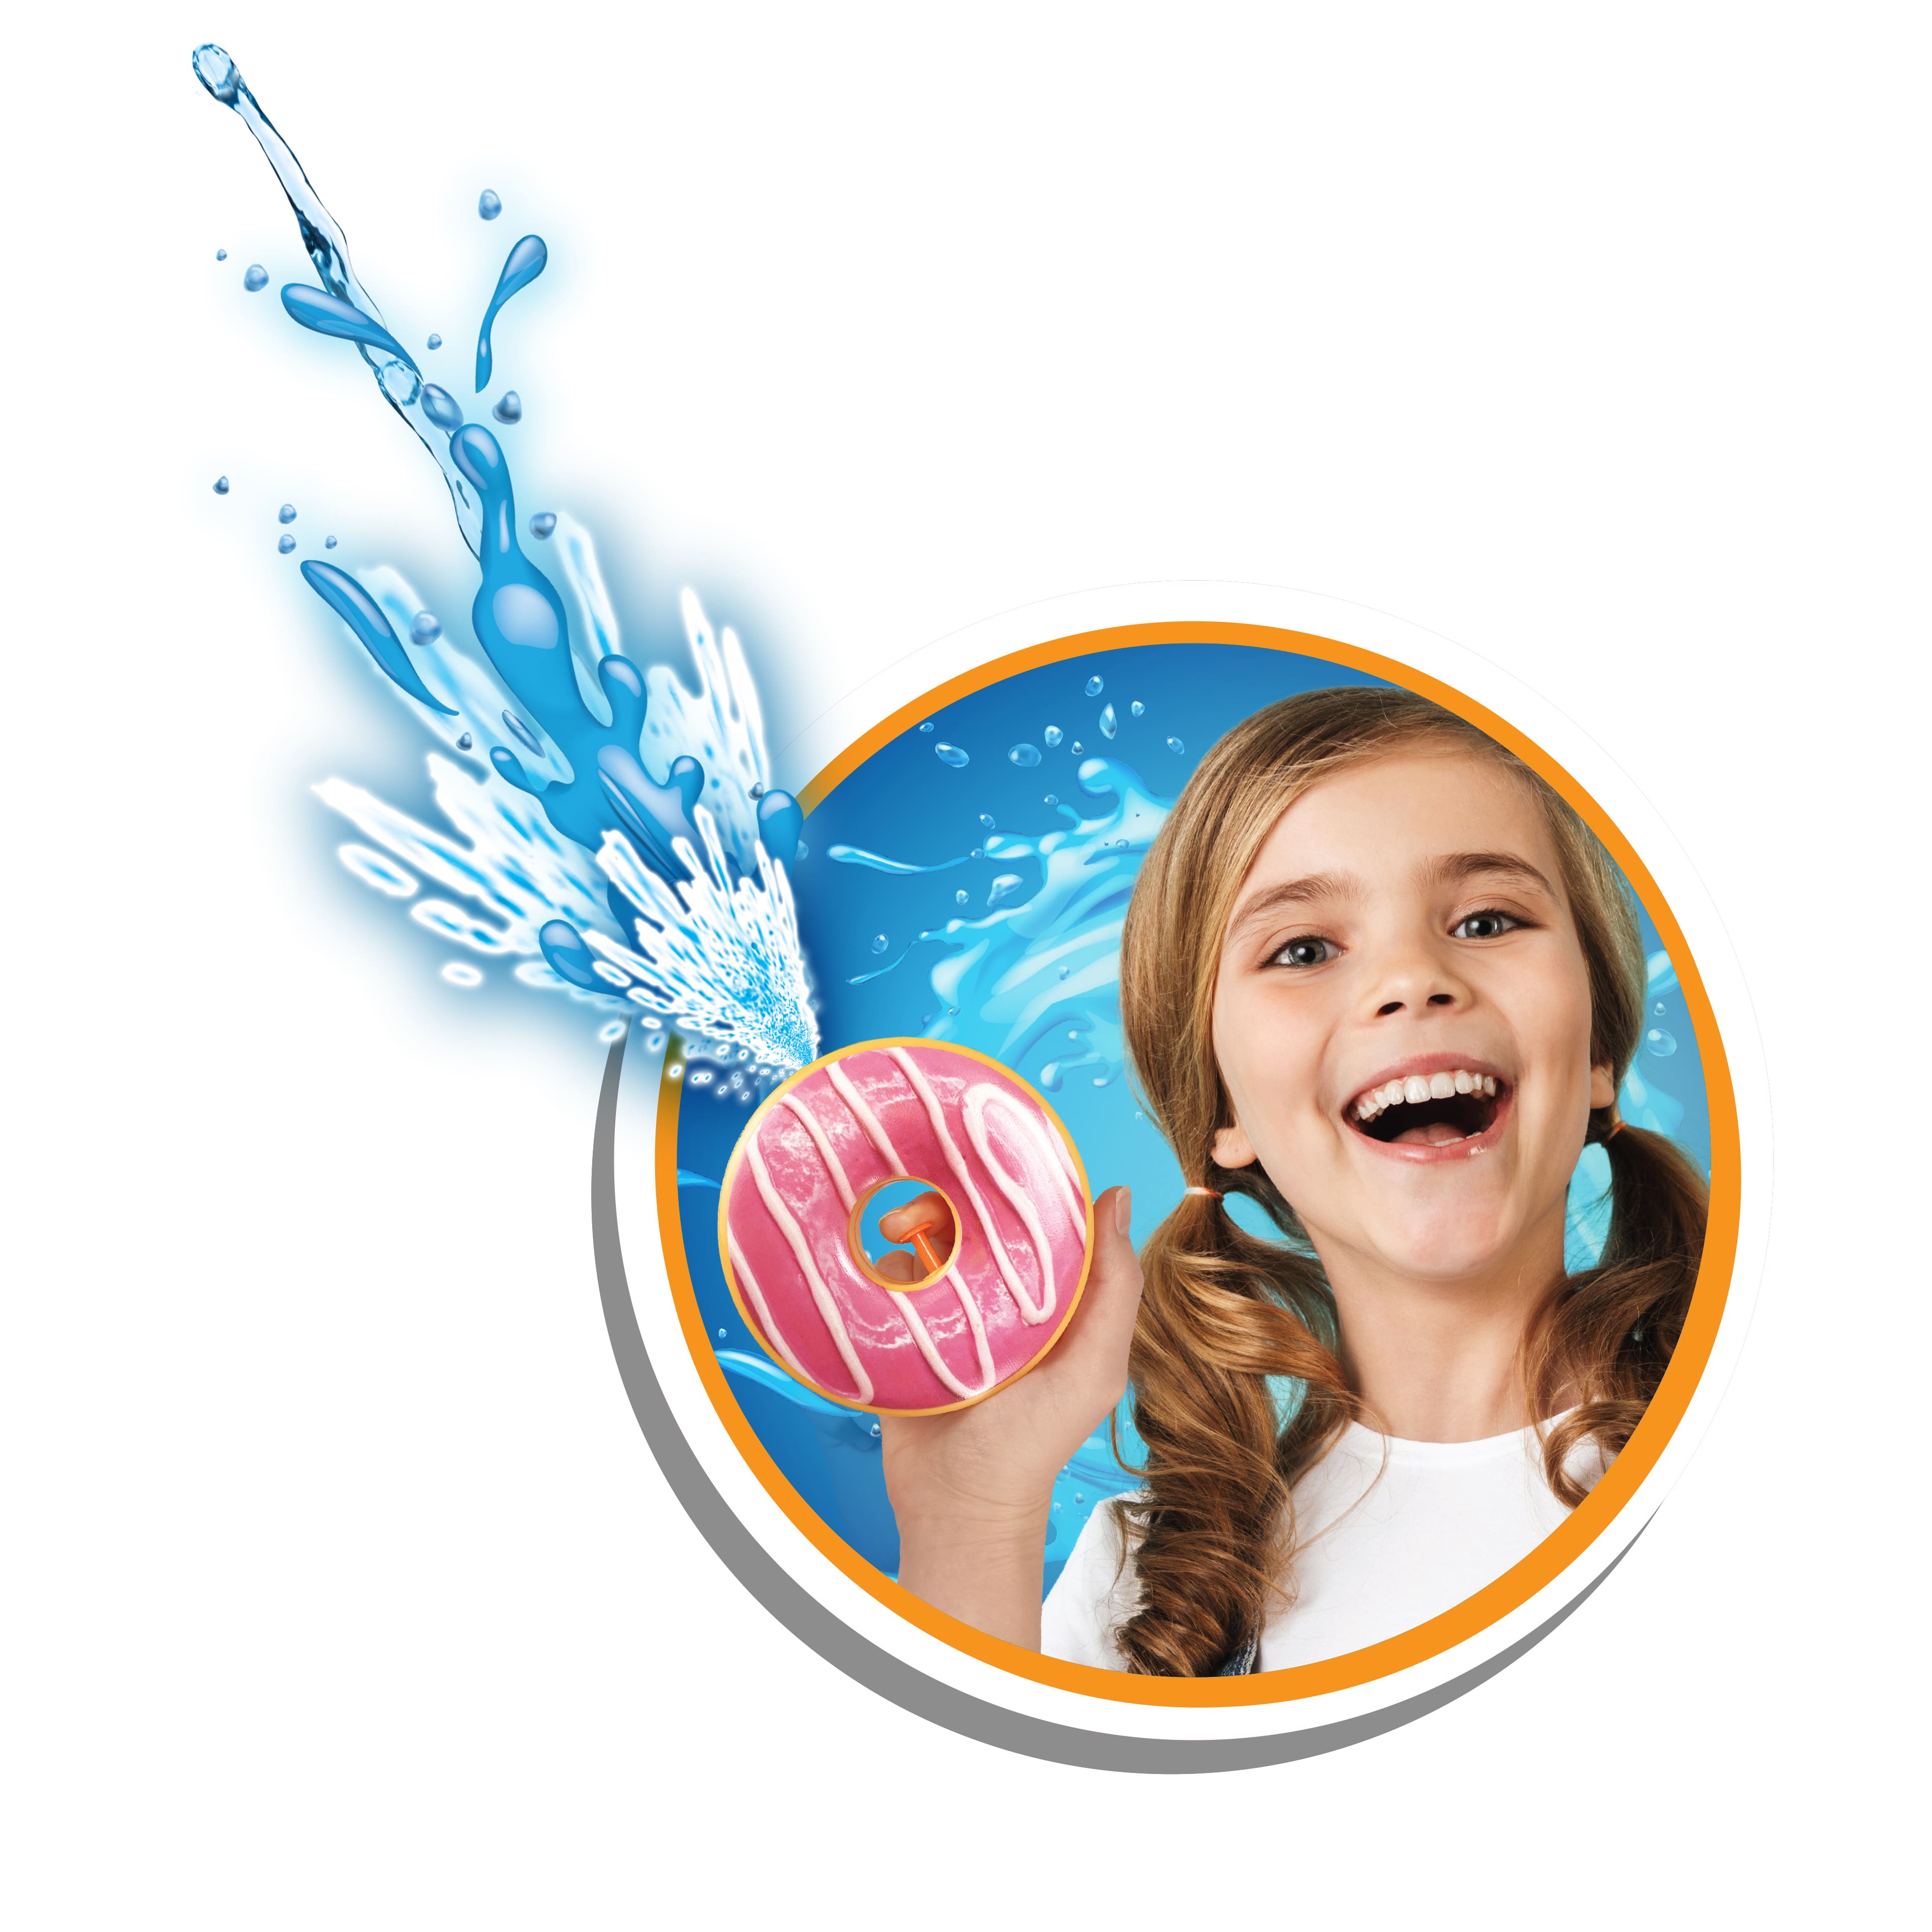 Assorted Ja-Ru&#xAE; Donut Water Squirter Pool Activity Toy, 1pc.